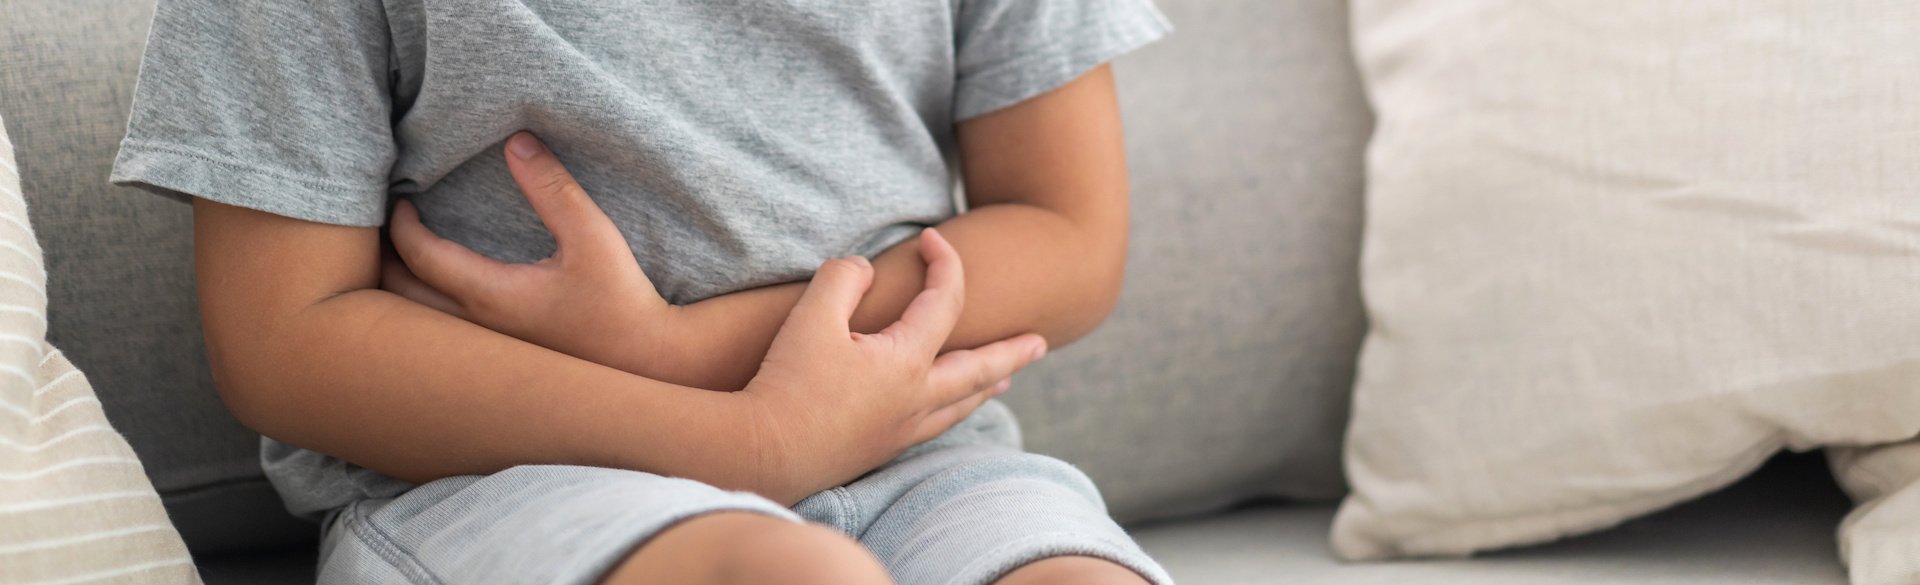 Child sitting on a couch holding their stomach in pain